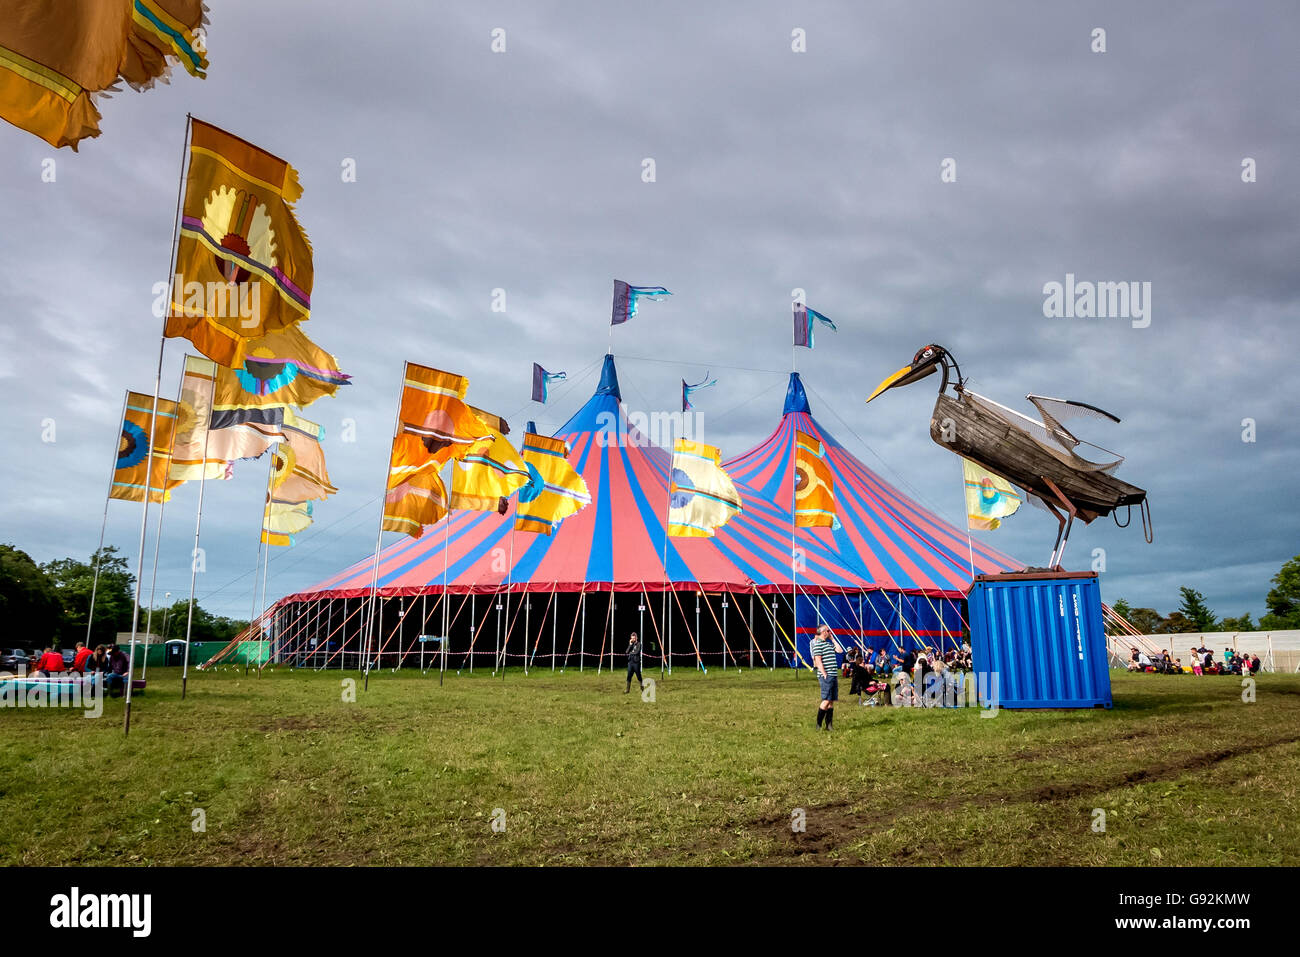 The Acoustic Tent and Field at The 2016 Glastonbury Festival of Contemporary Performing Arts. Stock Photo